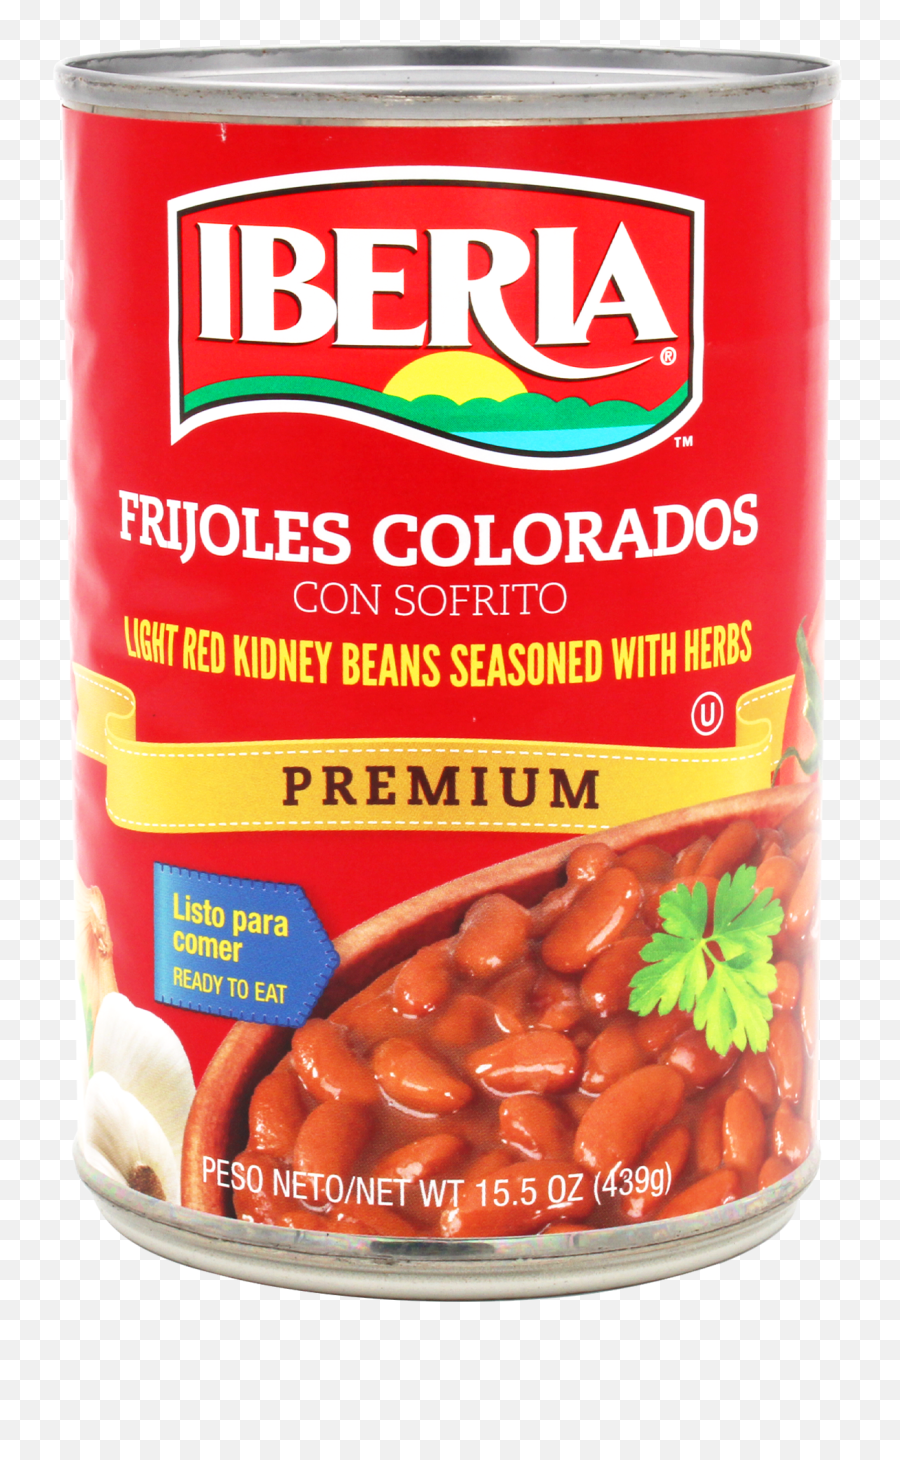 Iberia Red Kidney Beans In Sauce With Herbs 155 Oz Emoji,Eso Flipping The Bird Emoticon